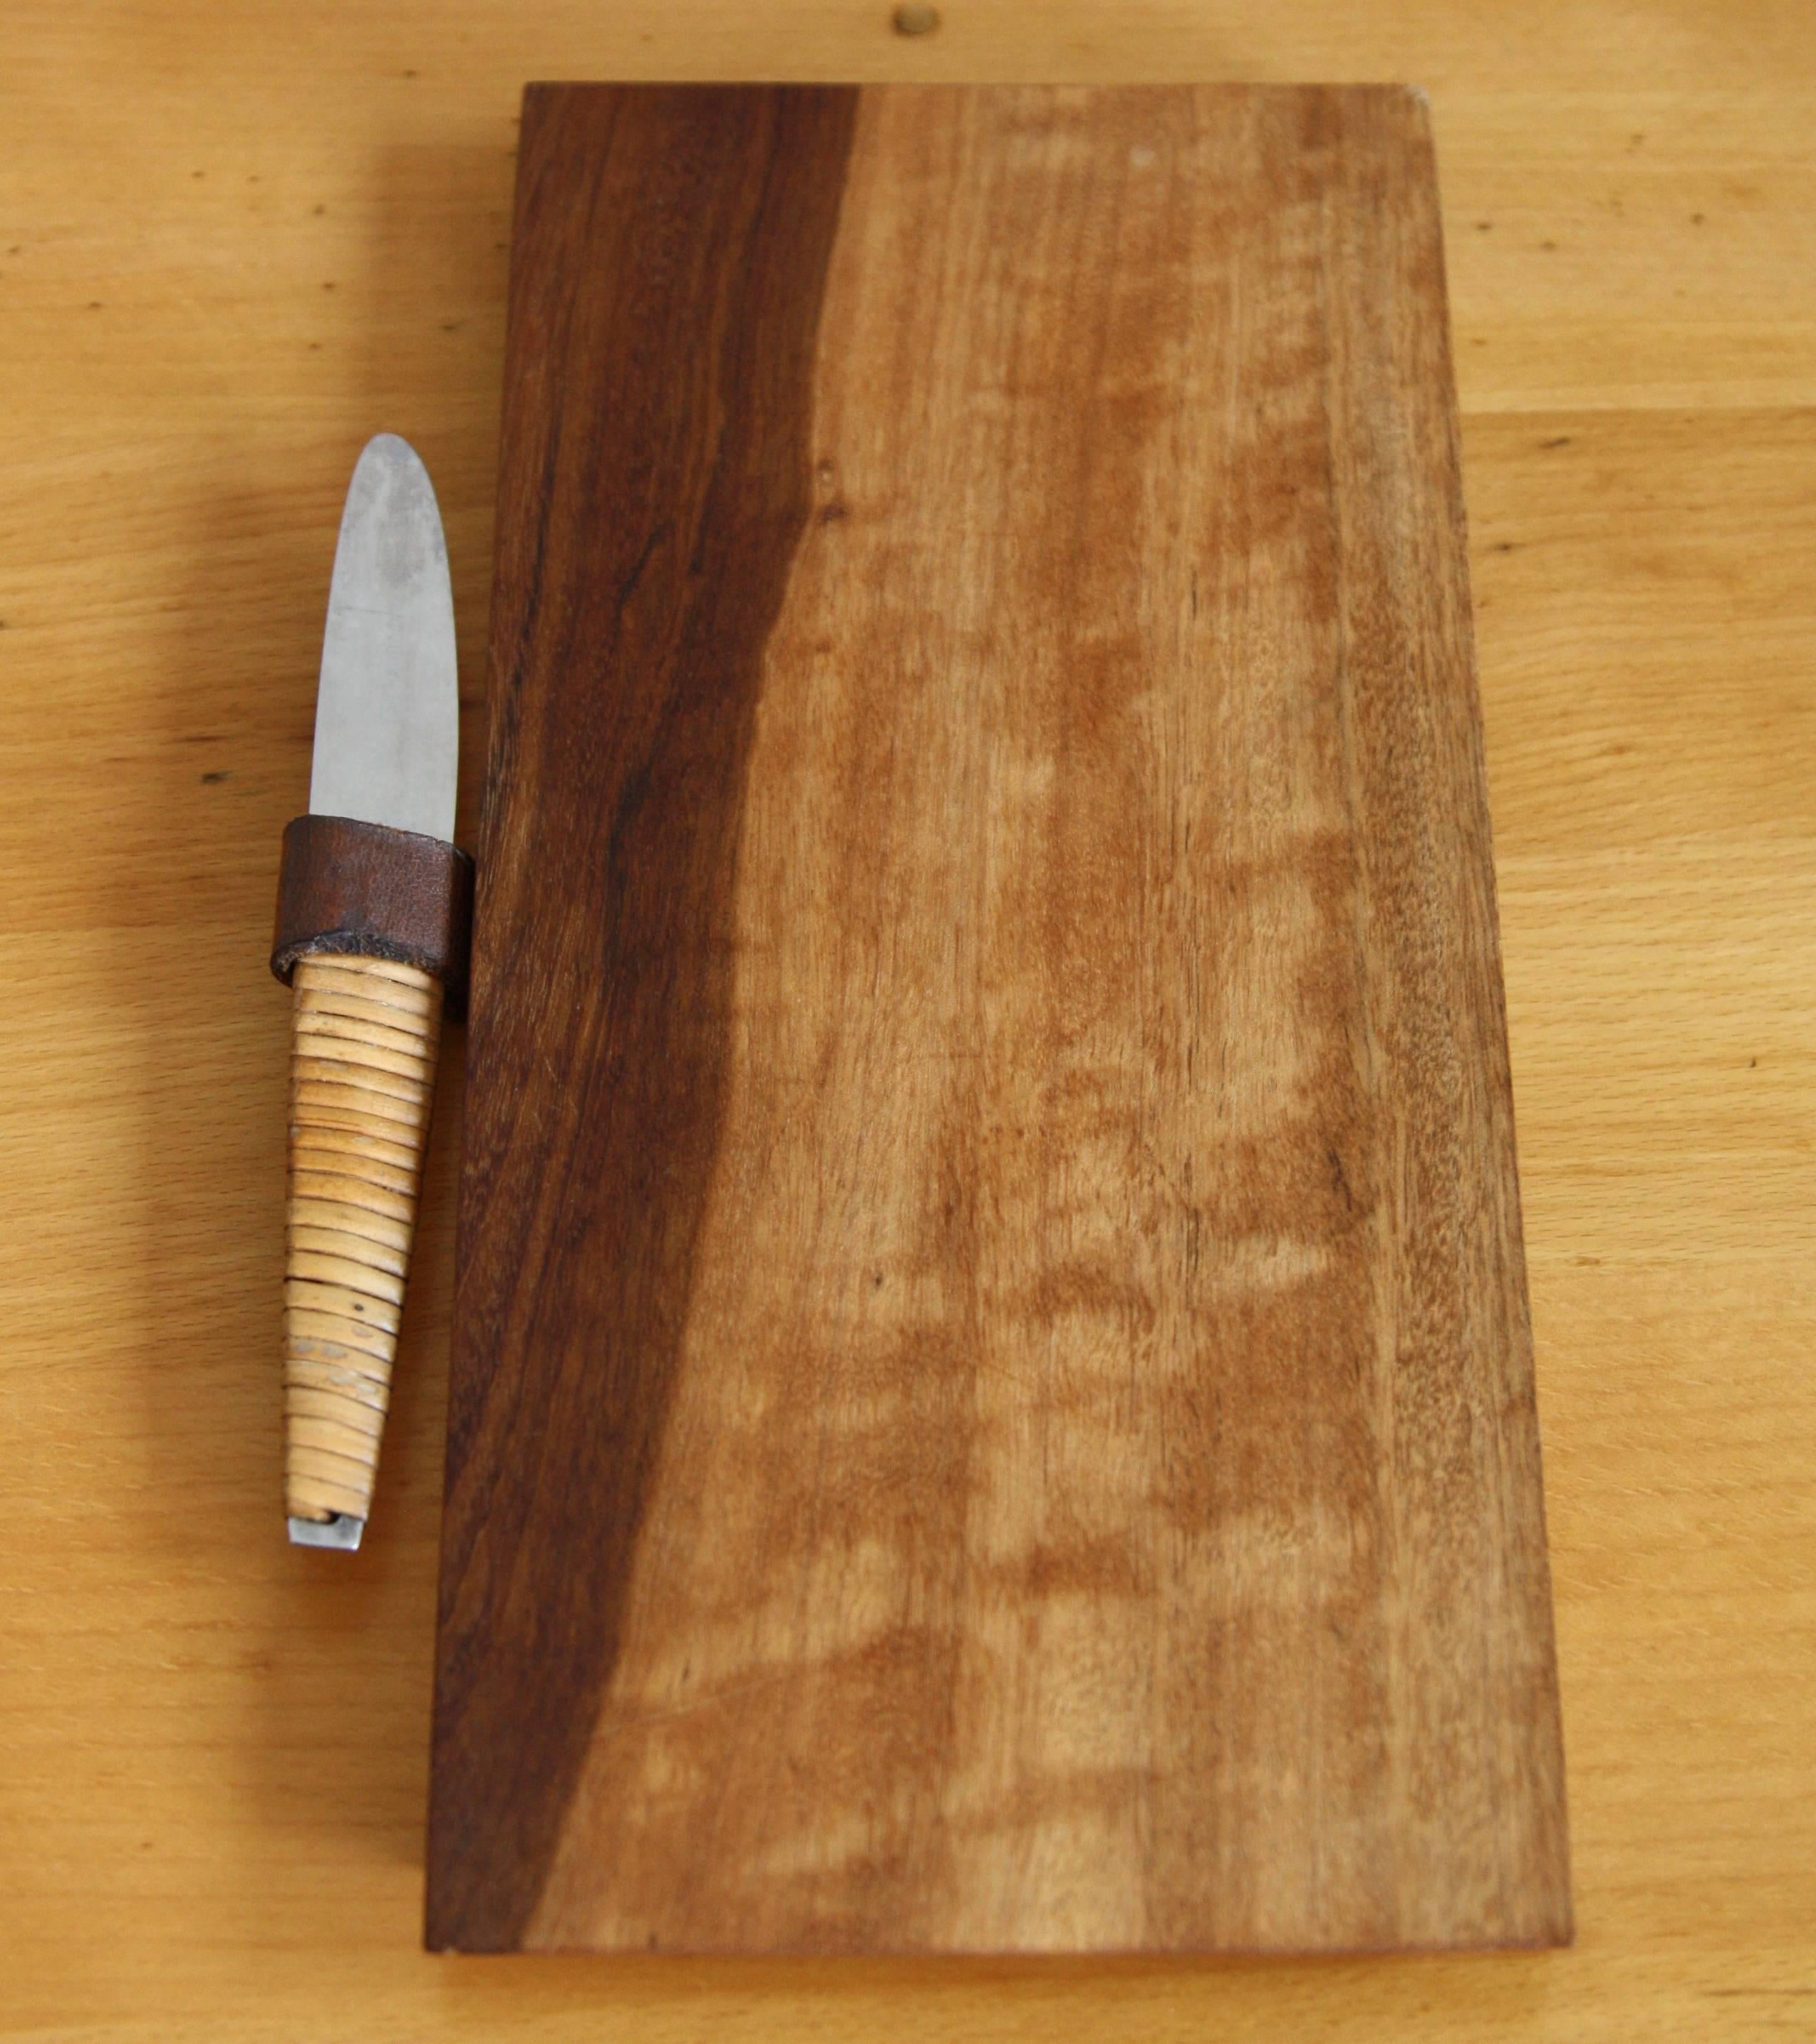 Vintage cutting board set designed and made by Carl Auböck. The walnut wood board is geometrically carved whilst the wrapped cane wrapped stainless steel knife is more organic in shape. The leather holder elegantly marries them together.